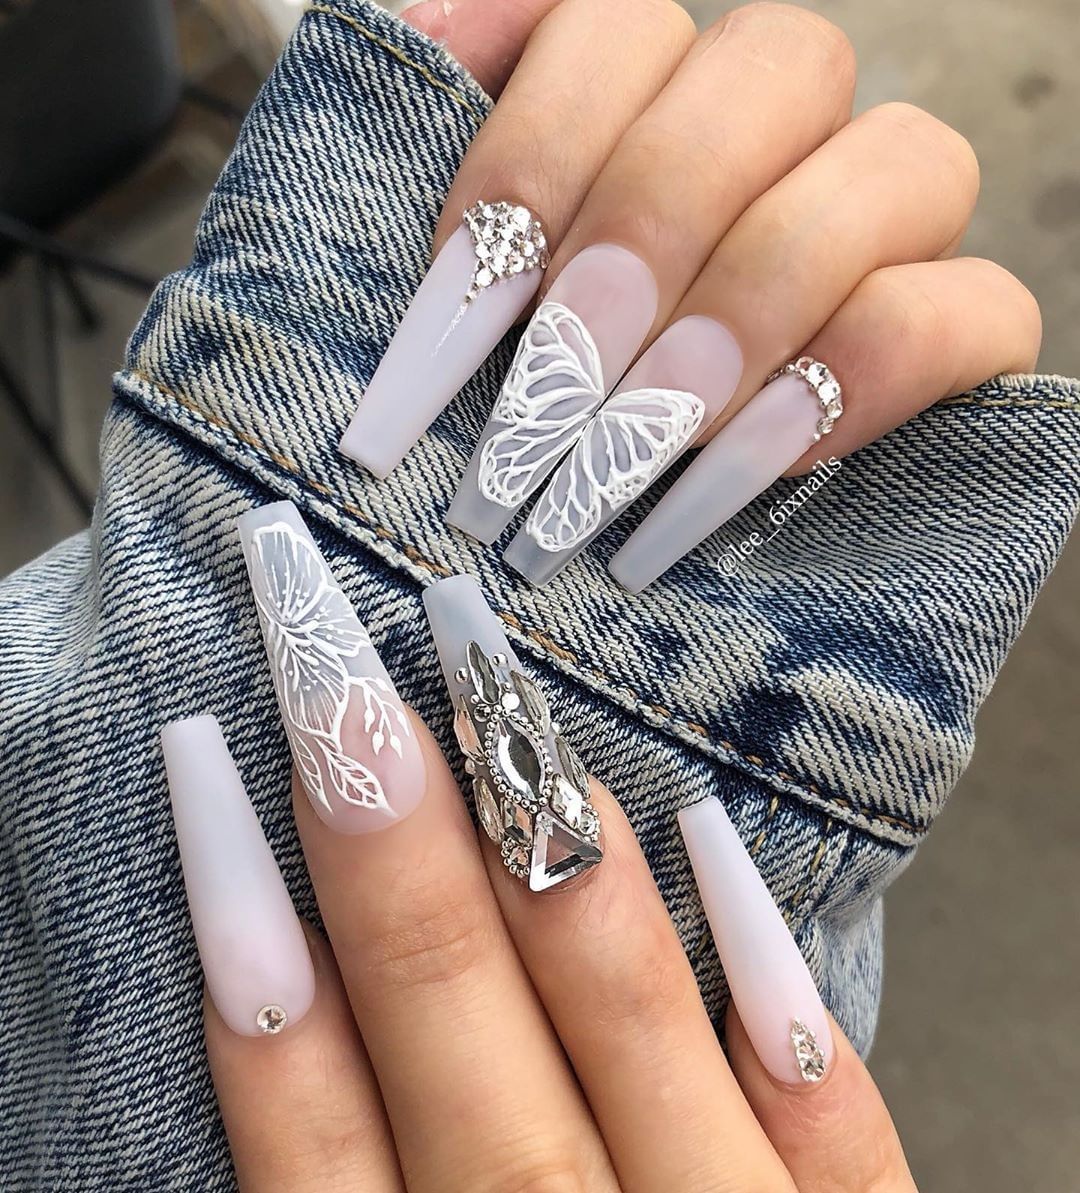 43 Crazy-Gorgeous Nail Ideas for Coffin Shaped Nails - StayGlam | Coffin  shape nails, Pink holographic nails, Gorgeous nails